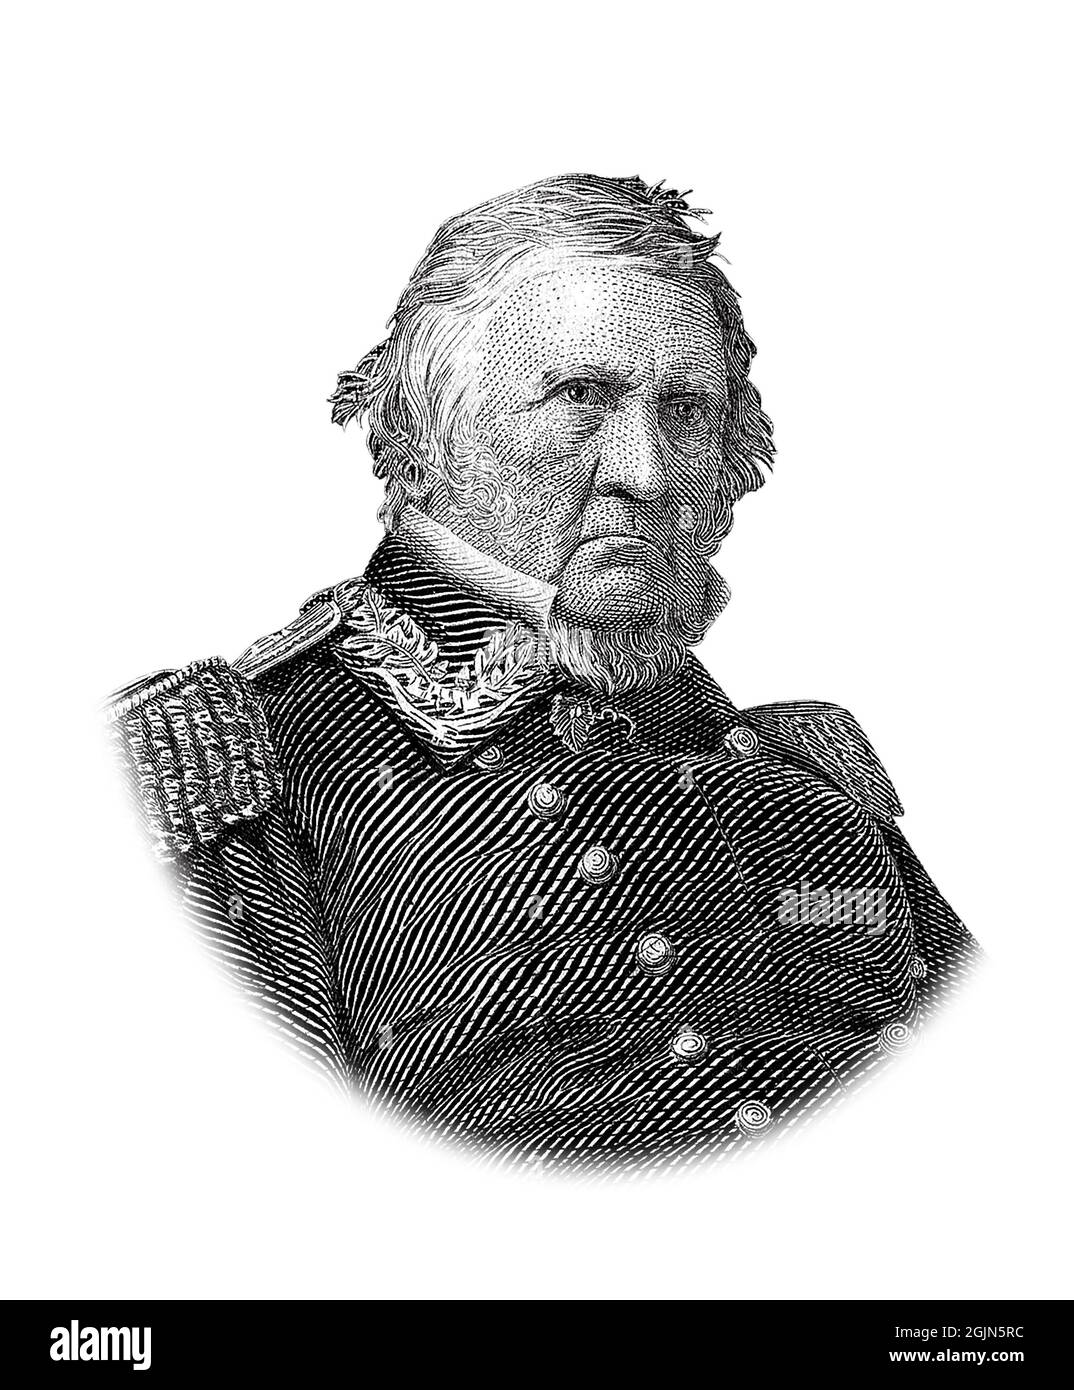 General Winfield Scott Portrait Isolated on White Background Stock Photo